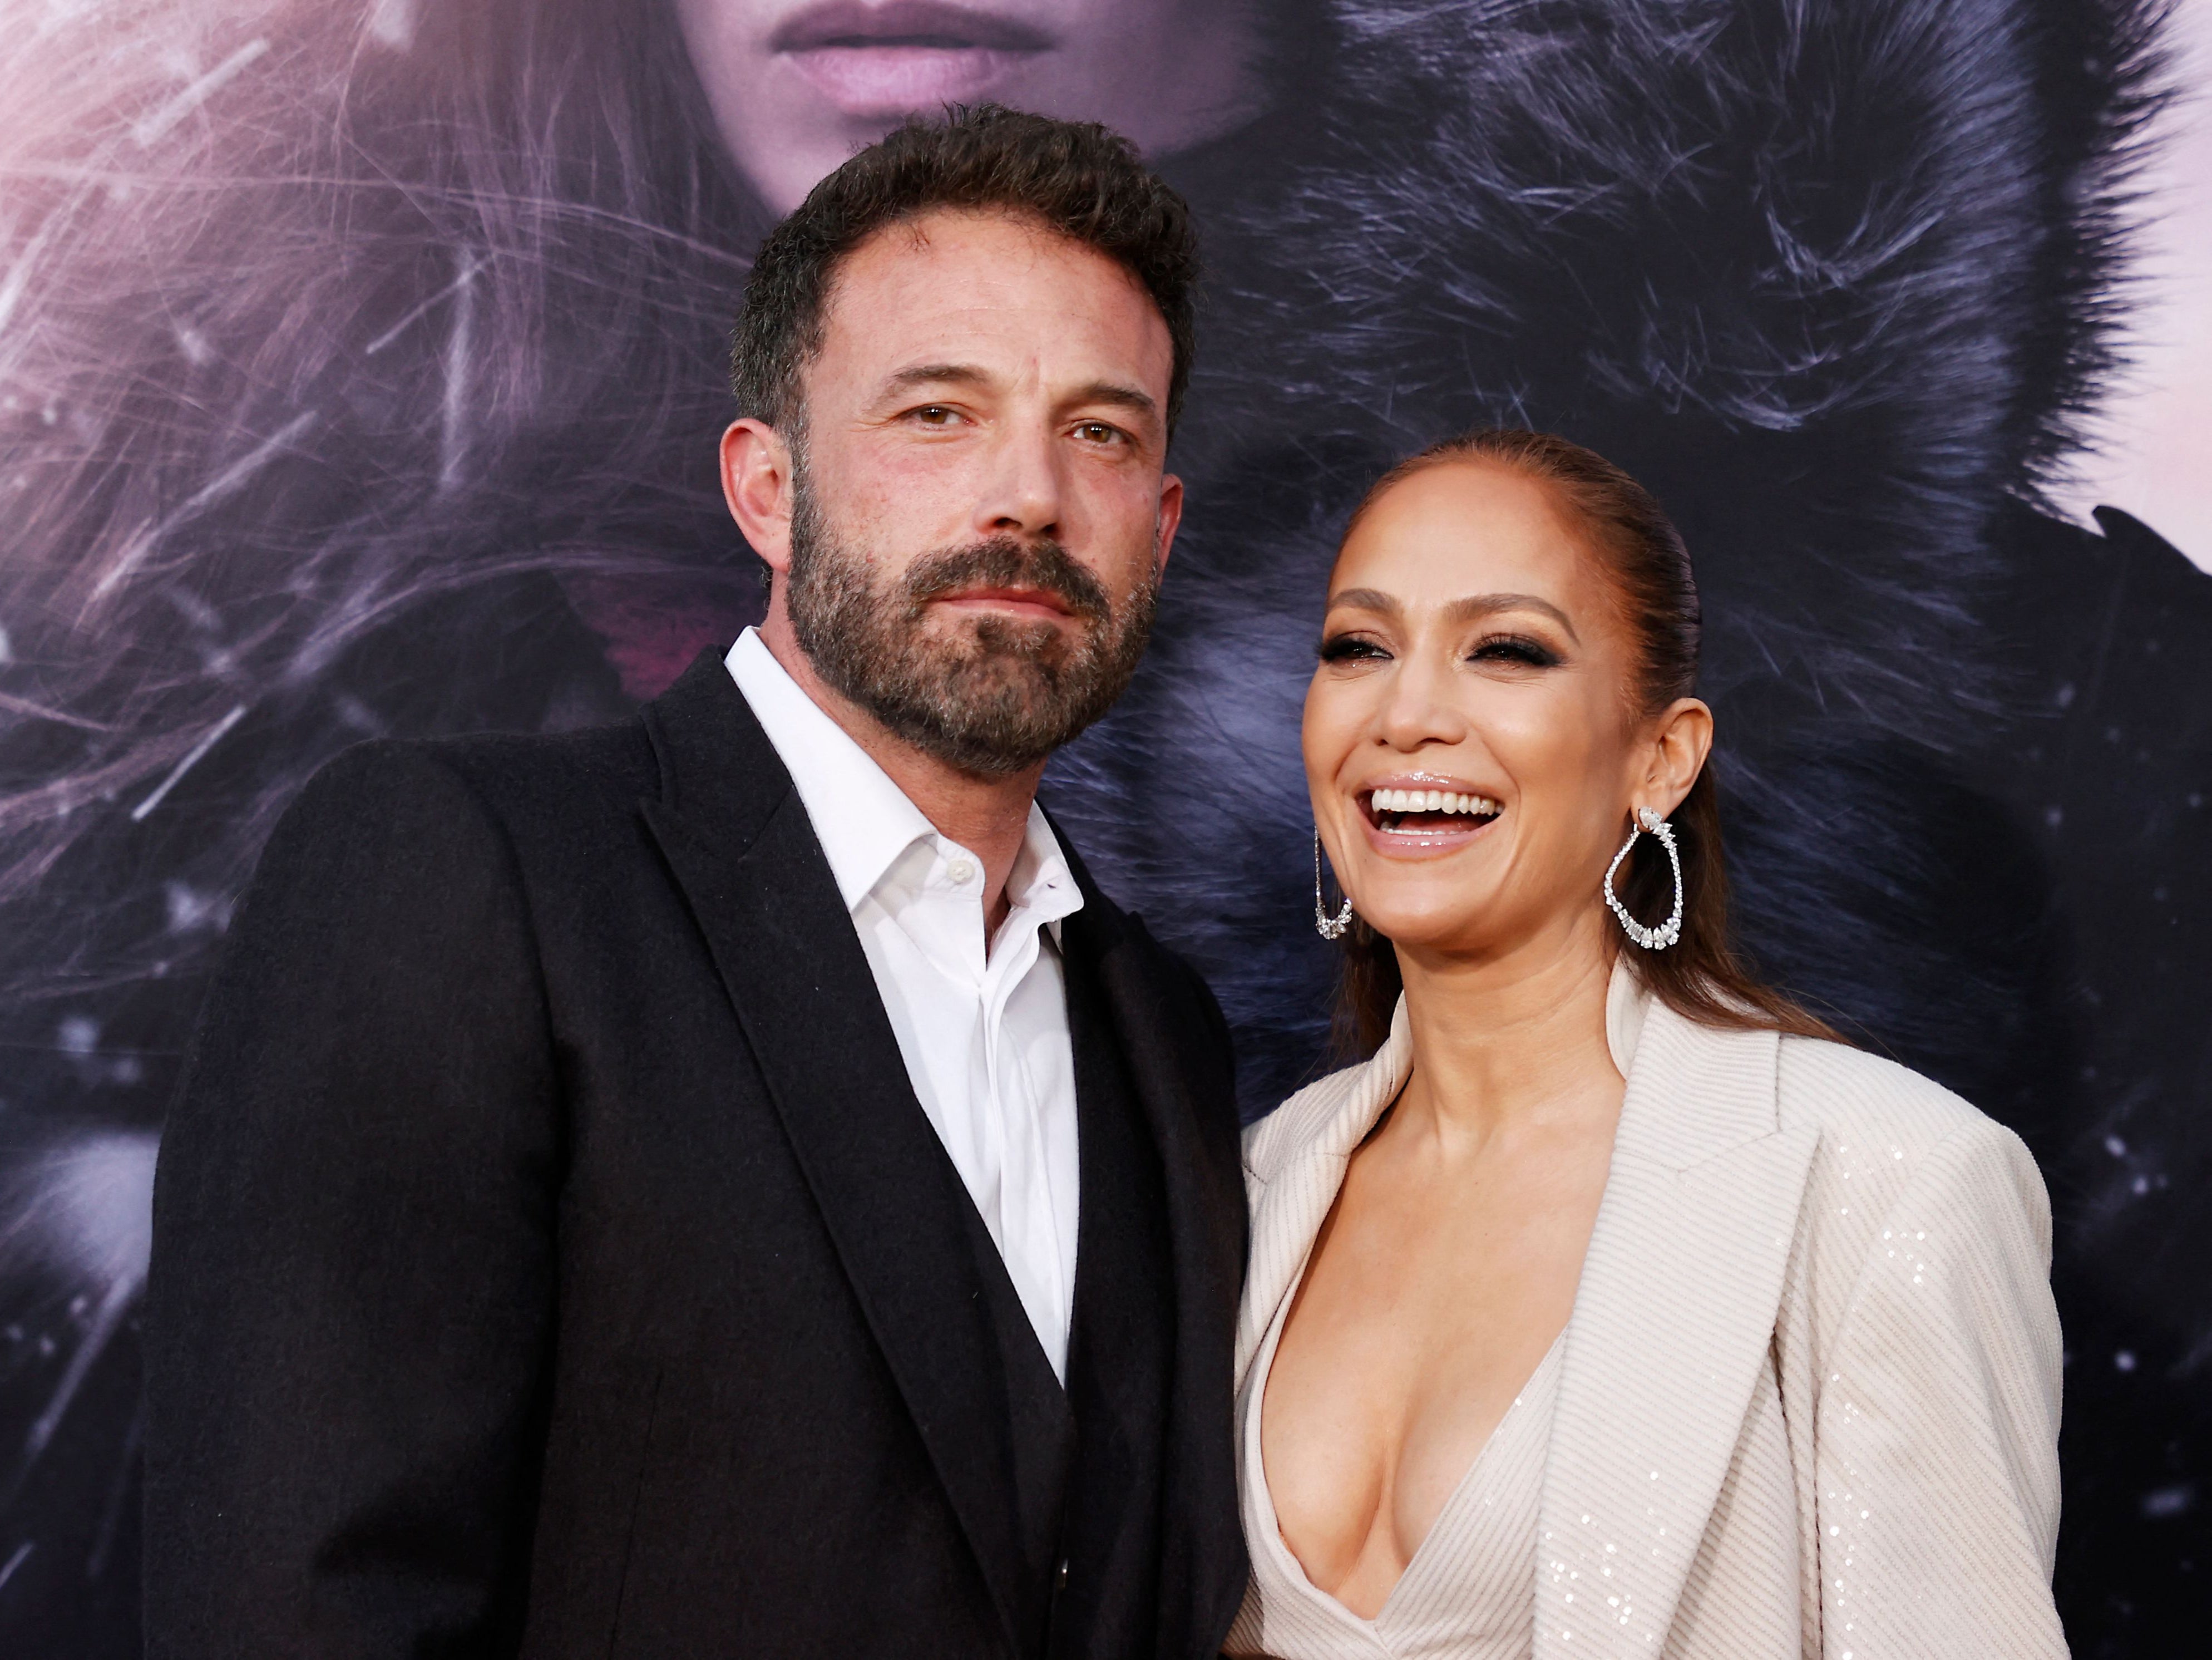 There are rumors of a rift between Ben Affleck and Jennifer Lopez